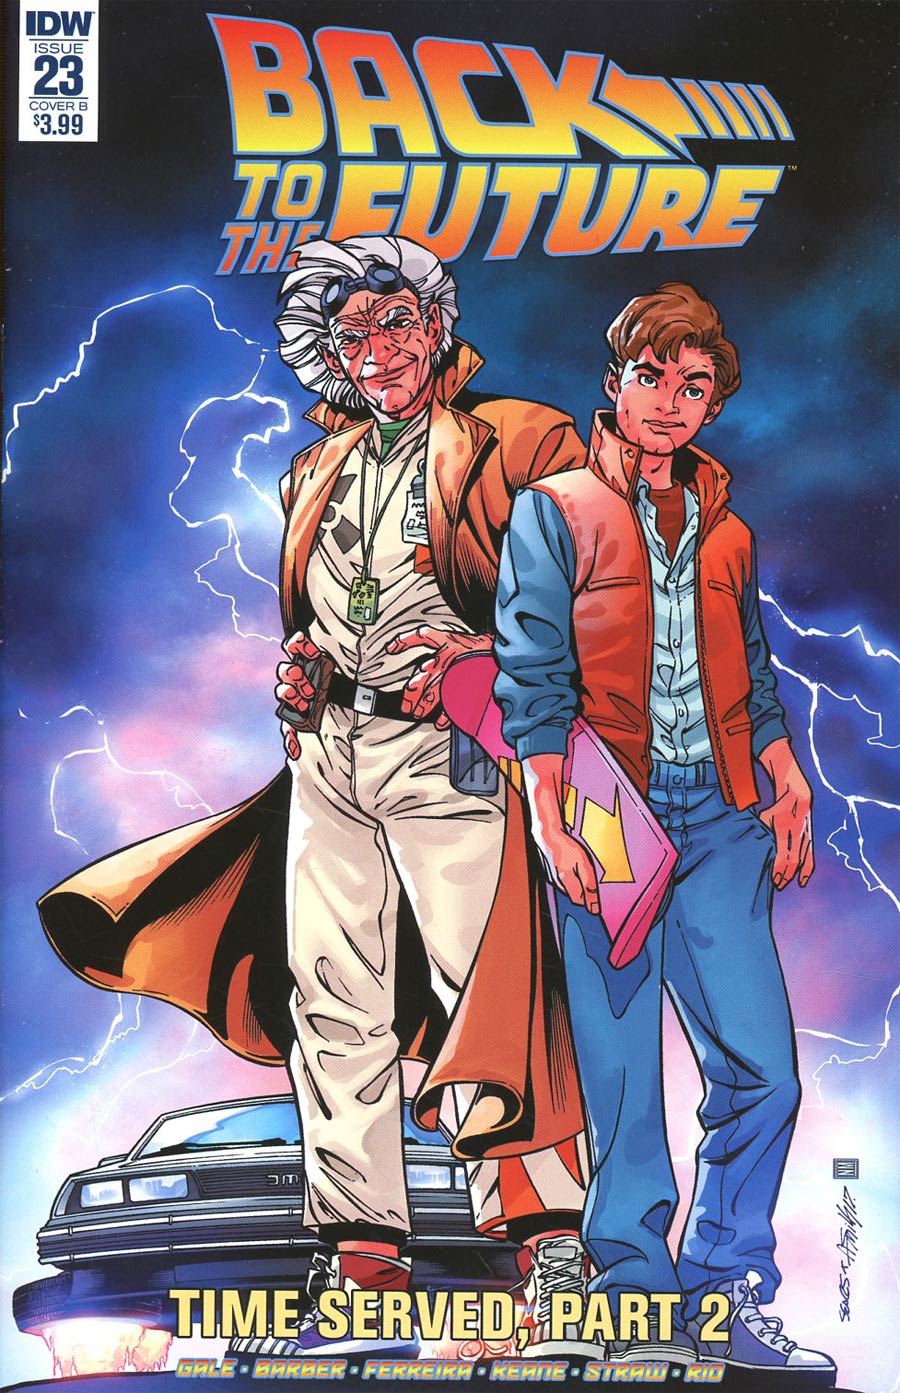 Back To The Future Vol 2 #23 Cover B Variant Bart Sears Cover